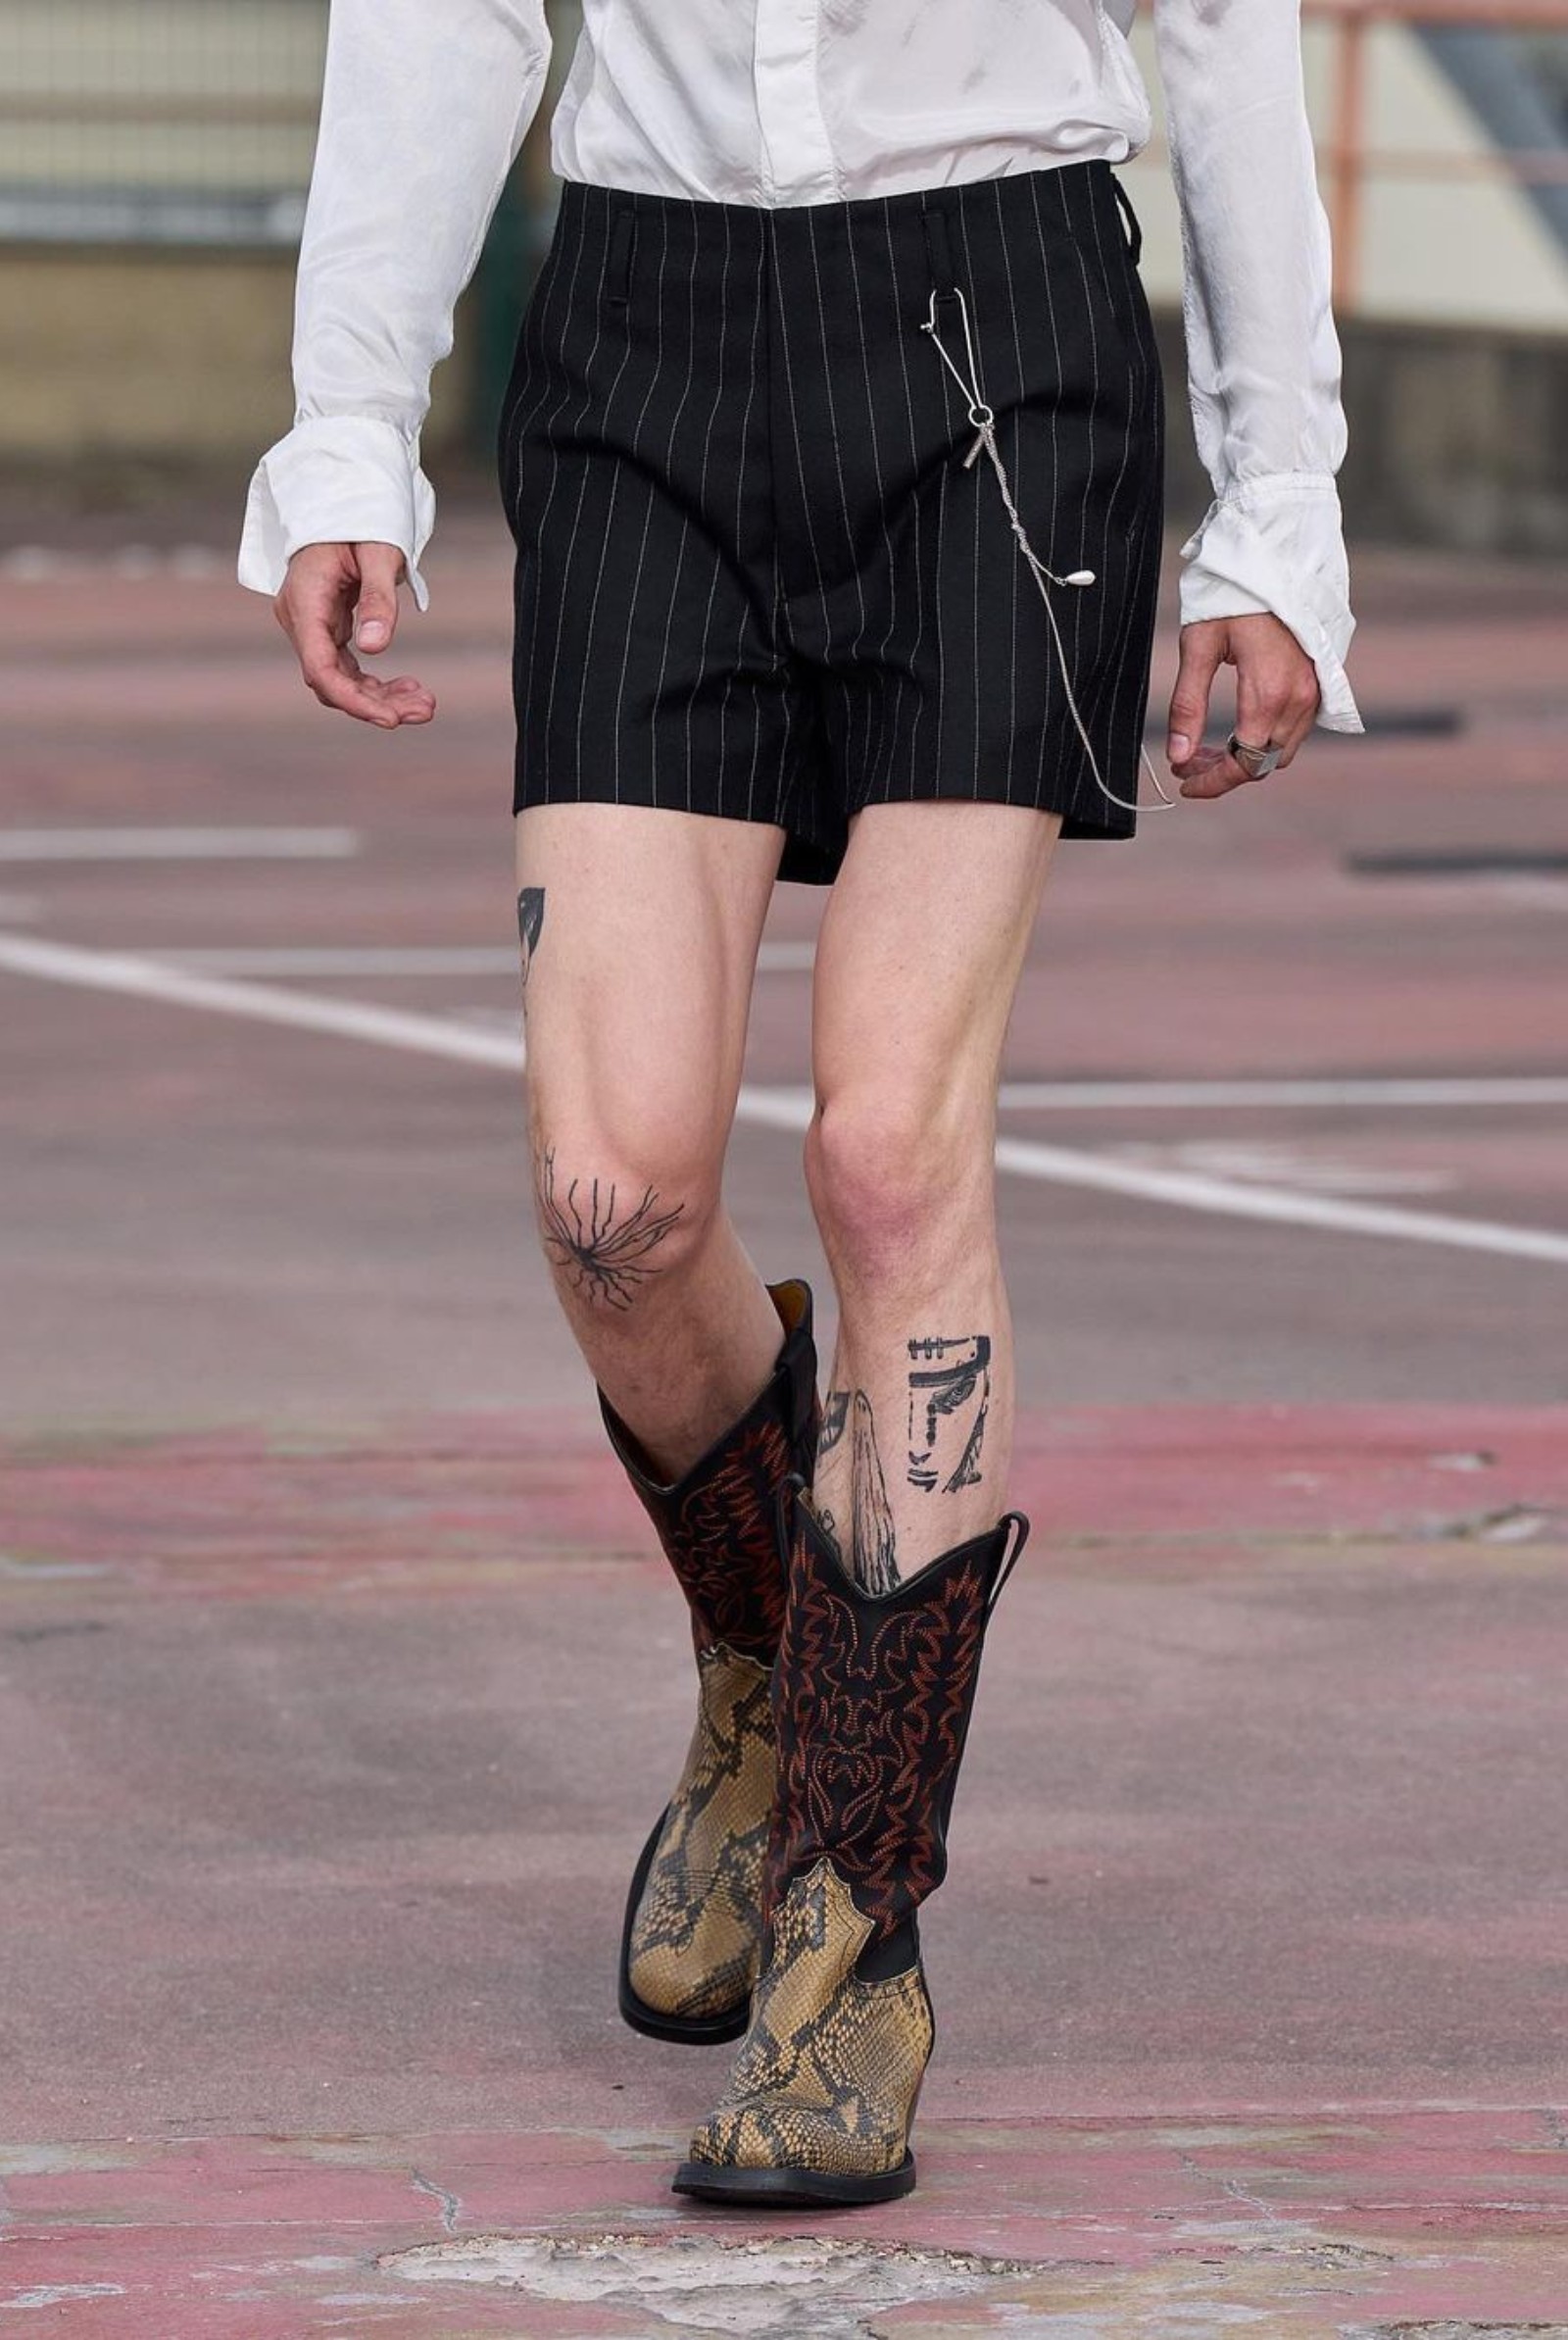 Shorts and Boots Combo Trend in Men's Fashion